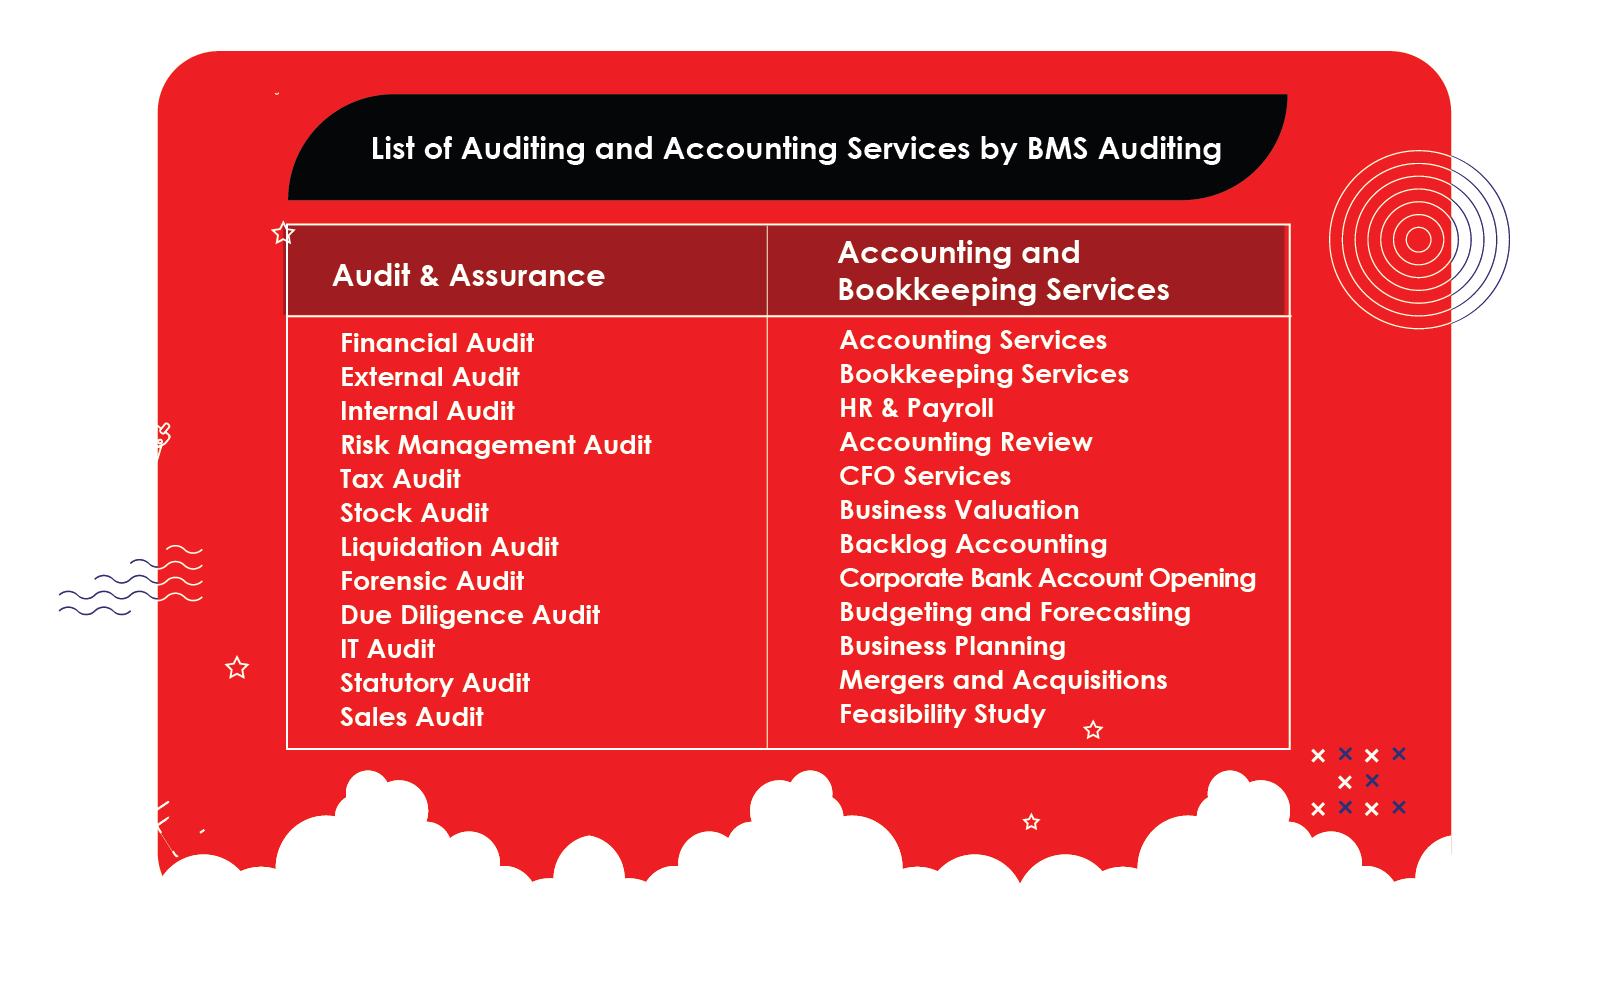 Image containing the list of audit and accounting services provided by top auditing and accounting firm in Bahrain